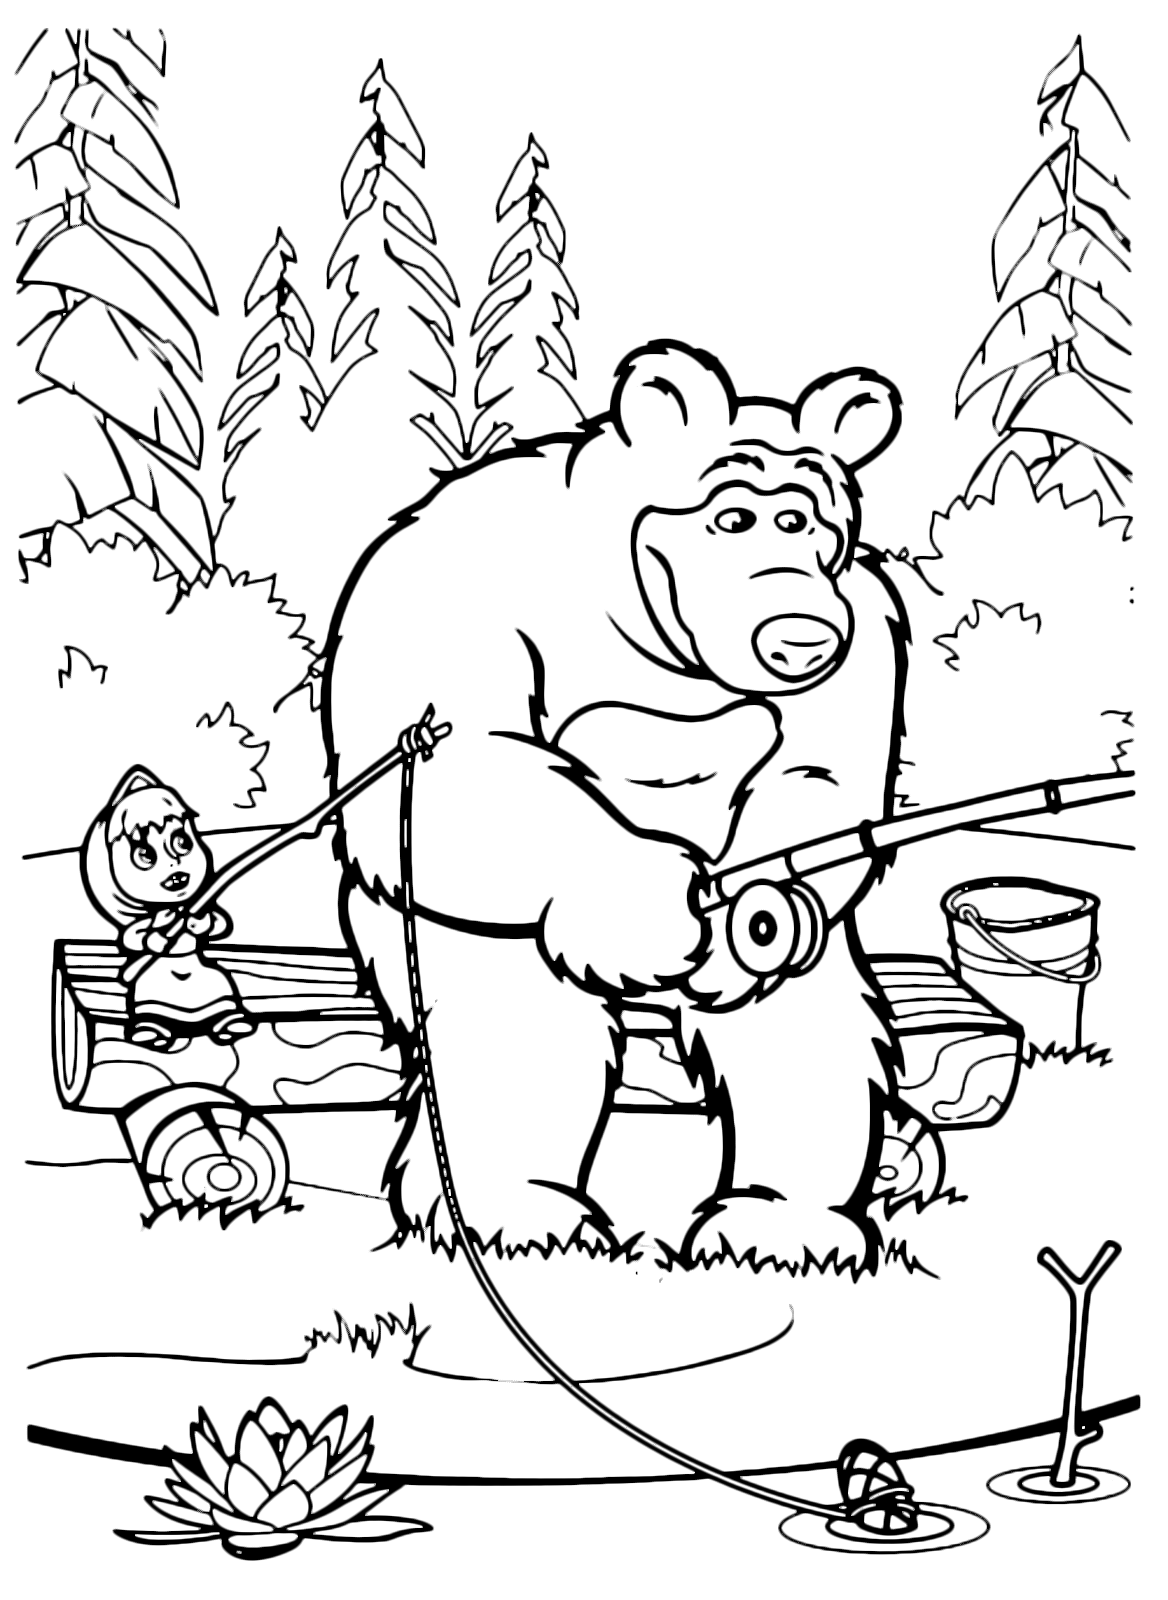 Coloring Pages : Masha And The Bear Coloring Pages Photo ...